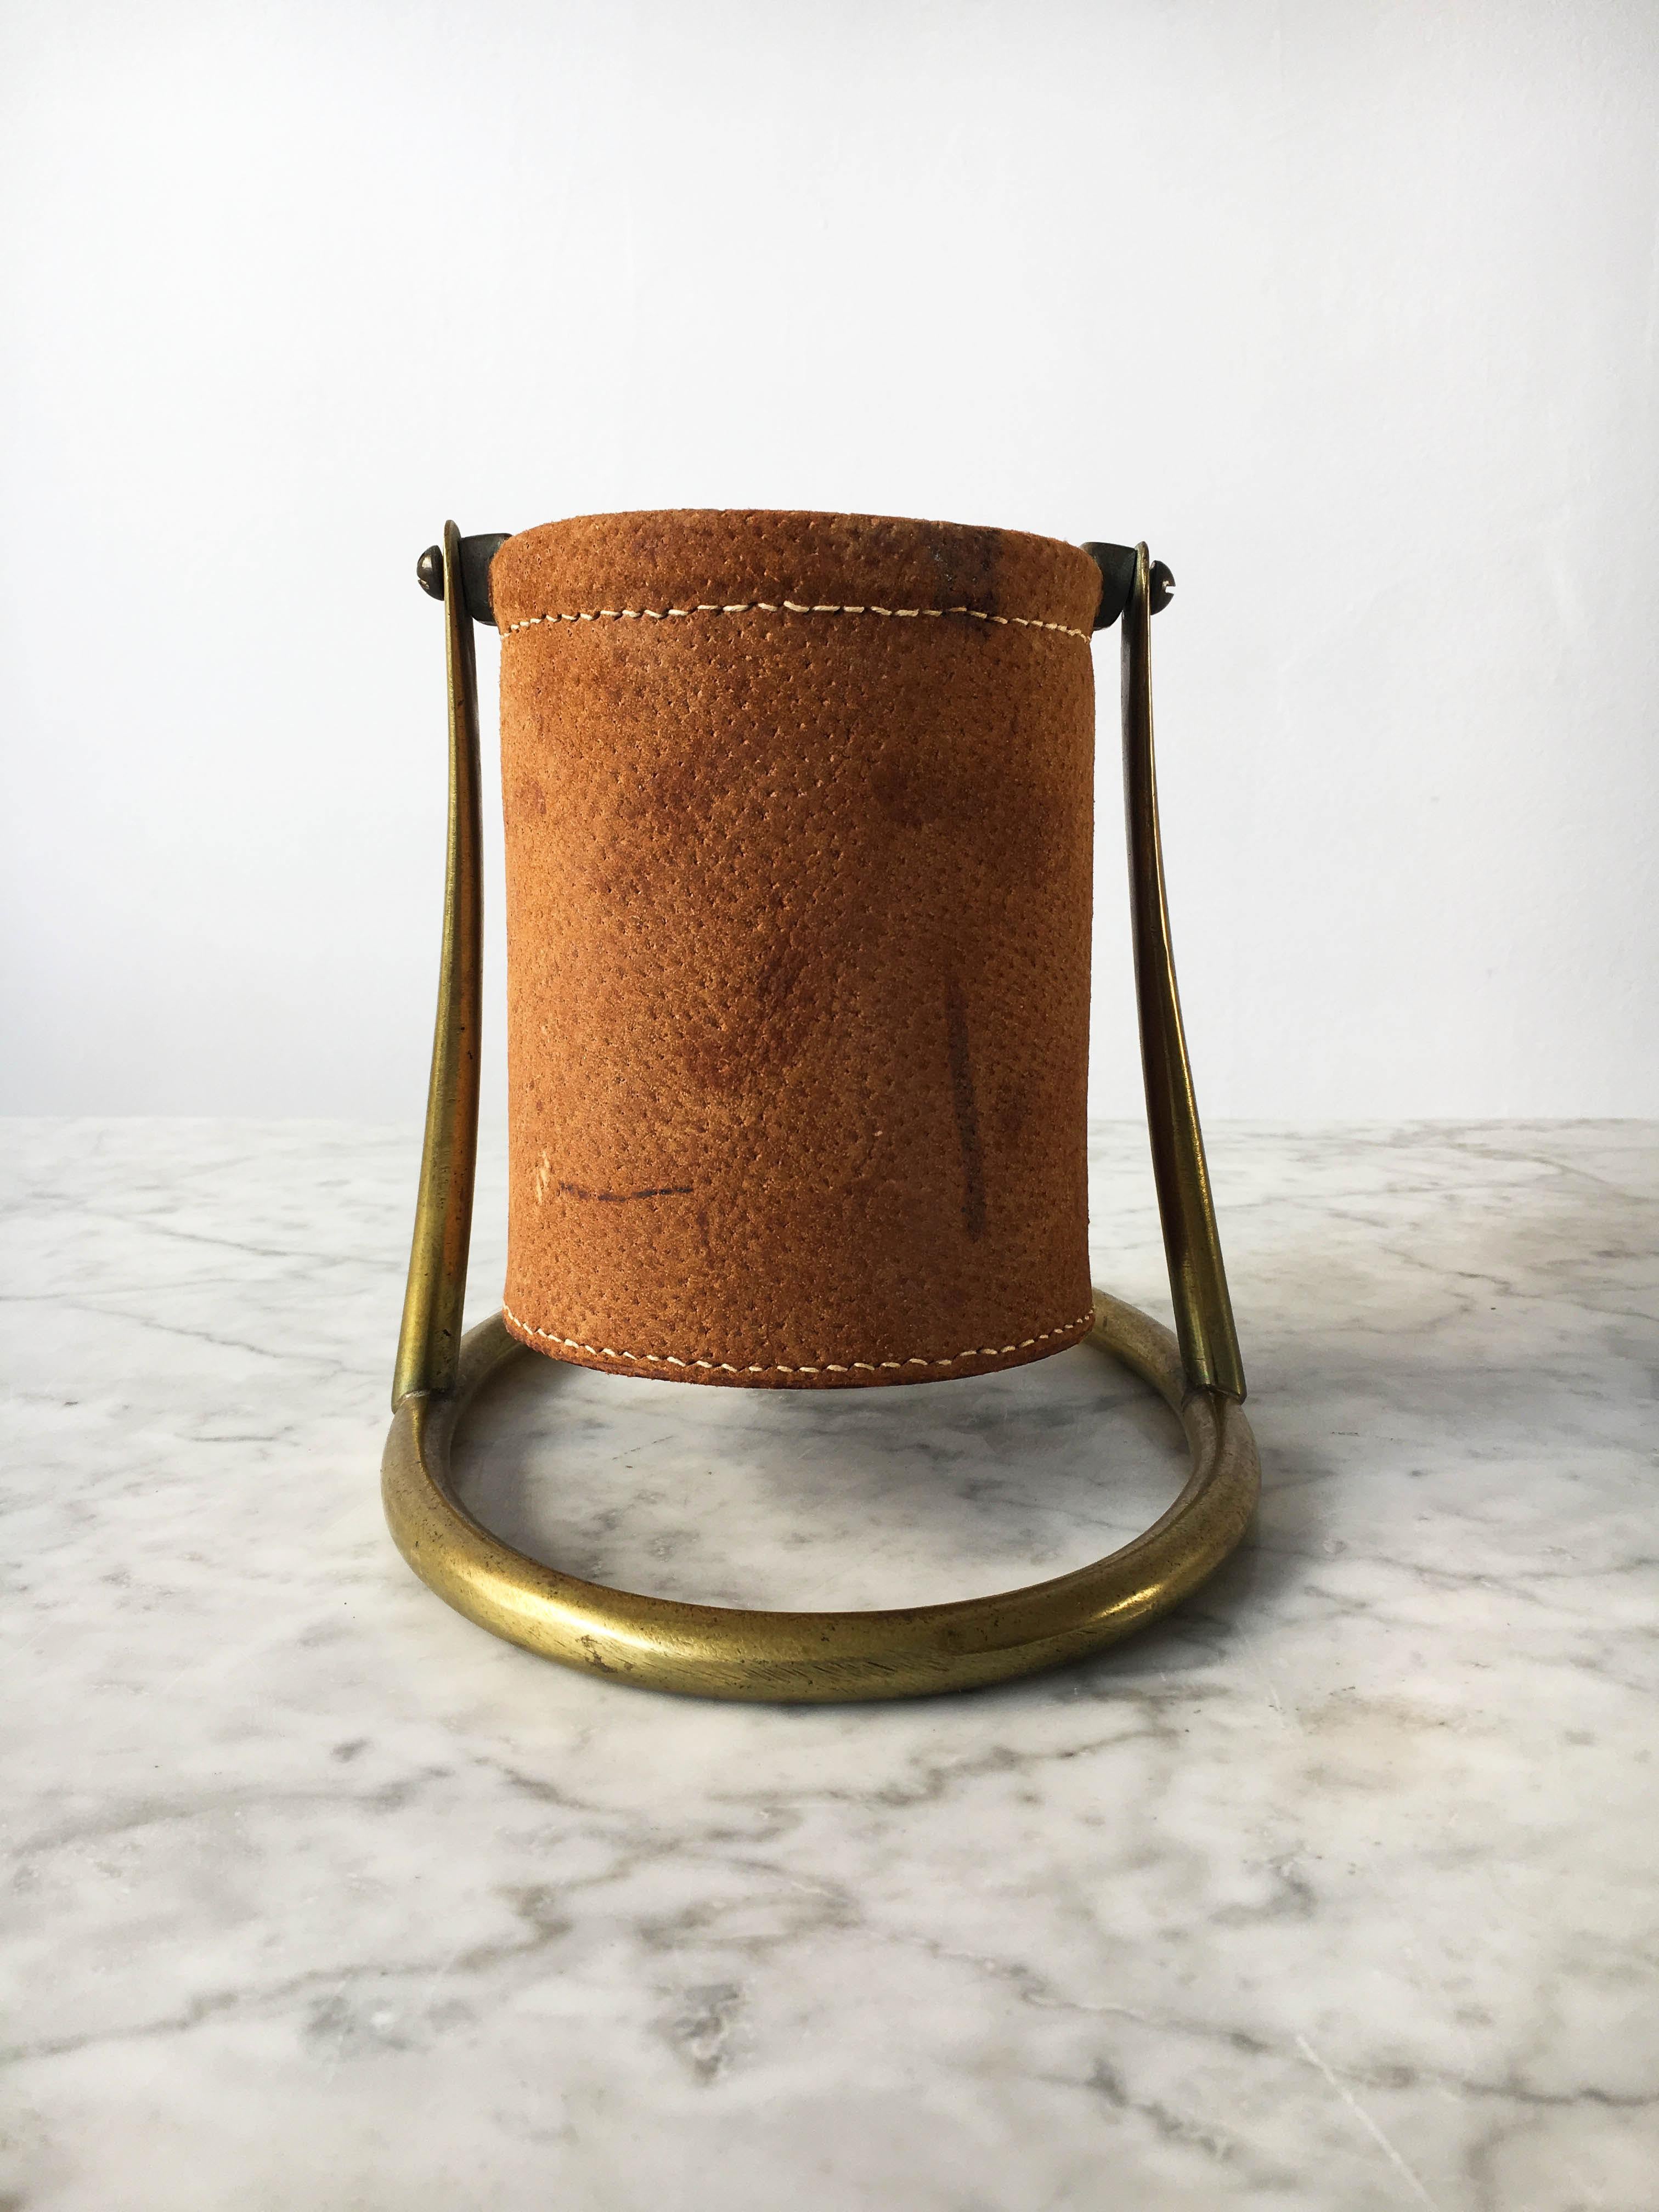 A beautiful modernist wine caddy and design object wine, model 5018 - Austria 1949 by Carl Auböck. In good vintage condition with just the right amount of gently aged patina on the brass and leather - please note some wear on the leather coherent